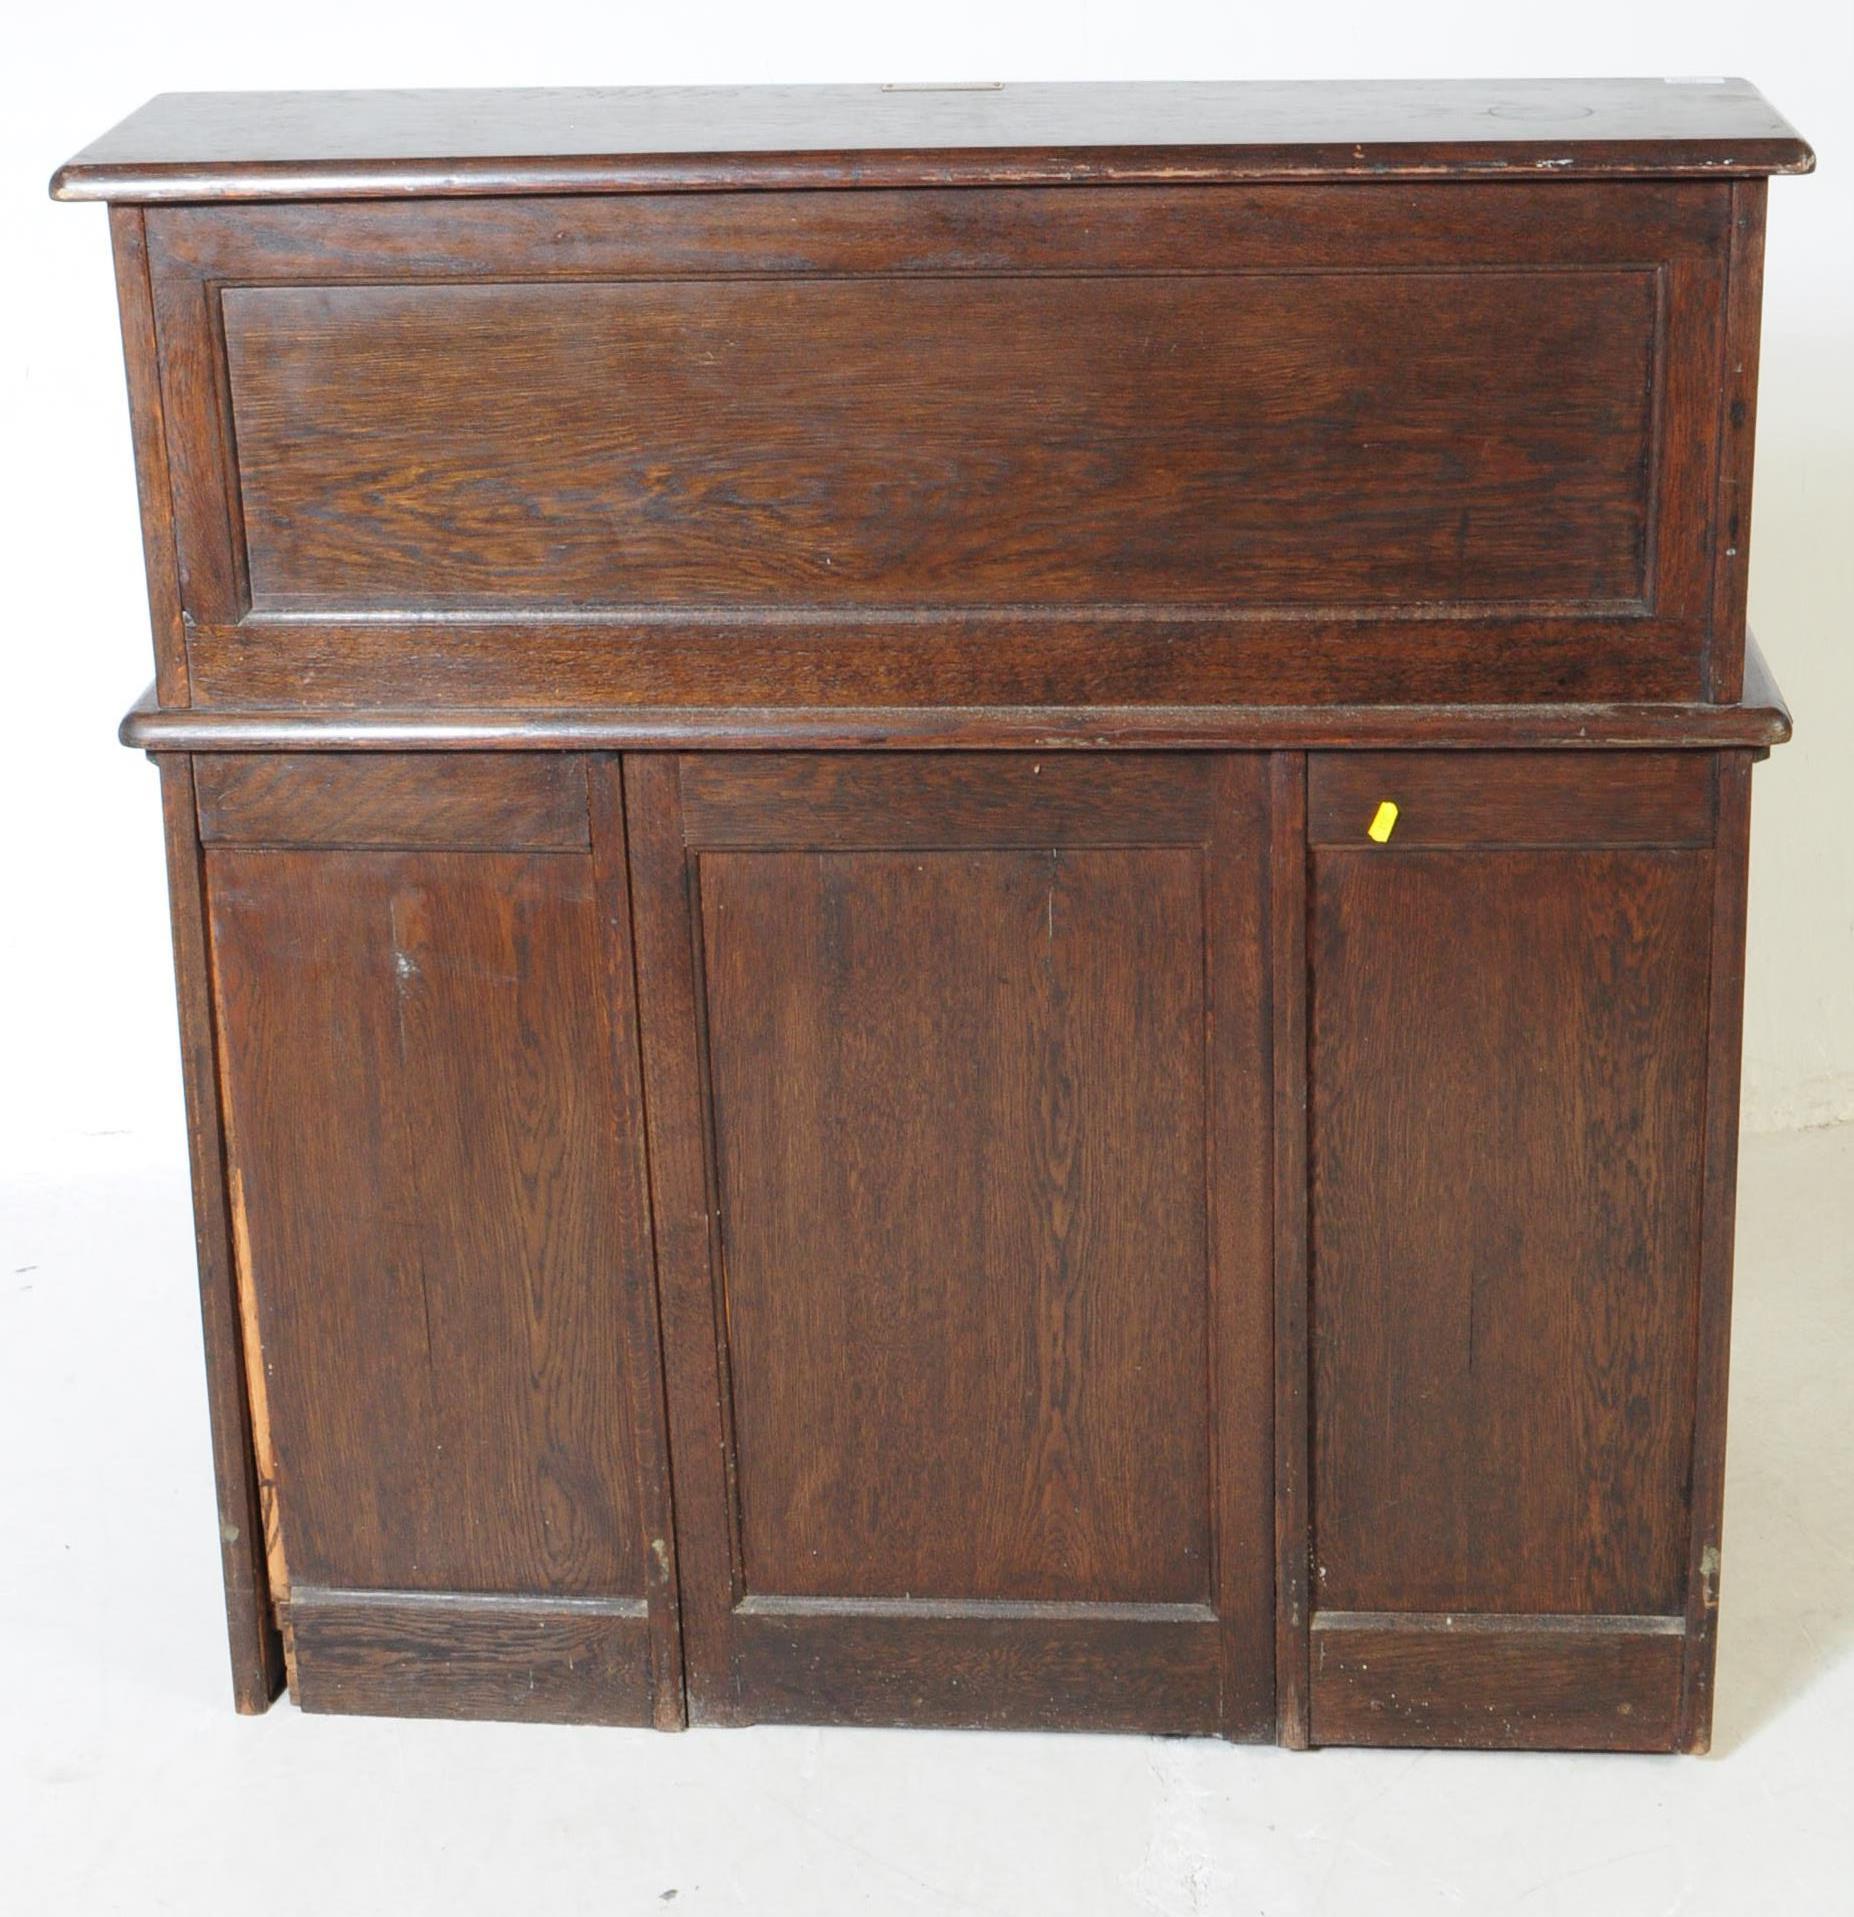 EARLY 20TH CENTURY ART DECO ROLL TOP WRITING DESK - Image 4 of 5